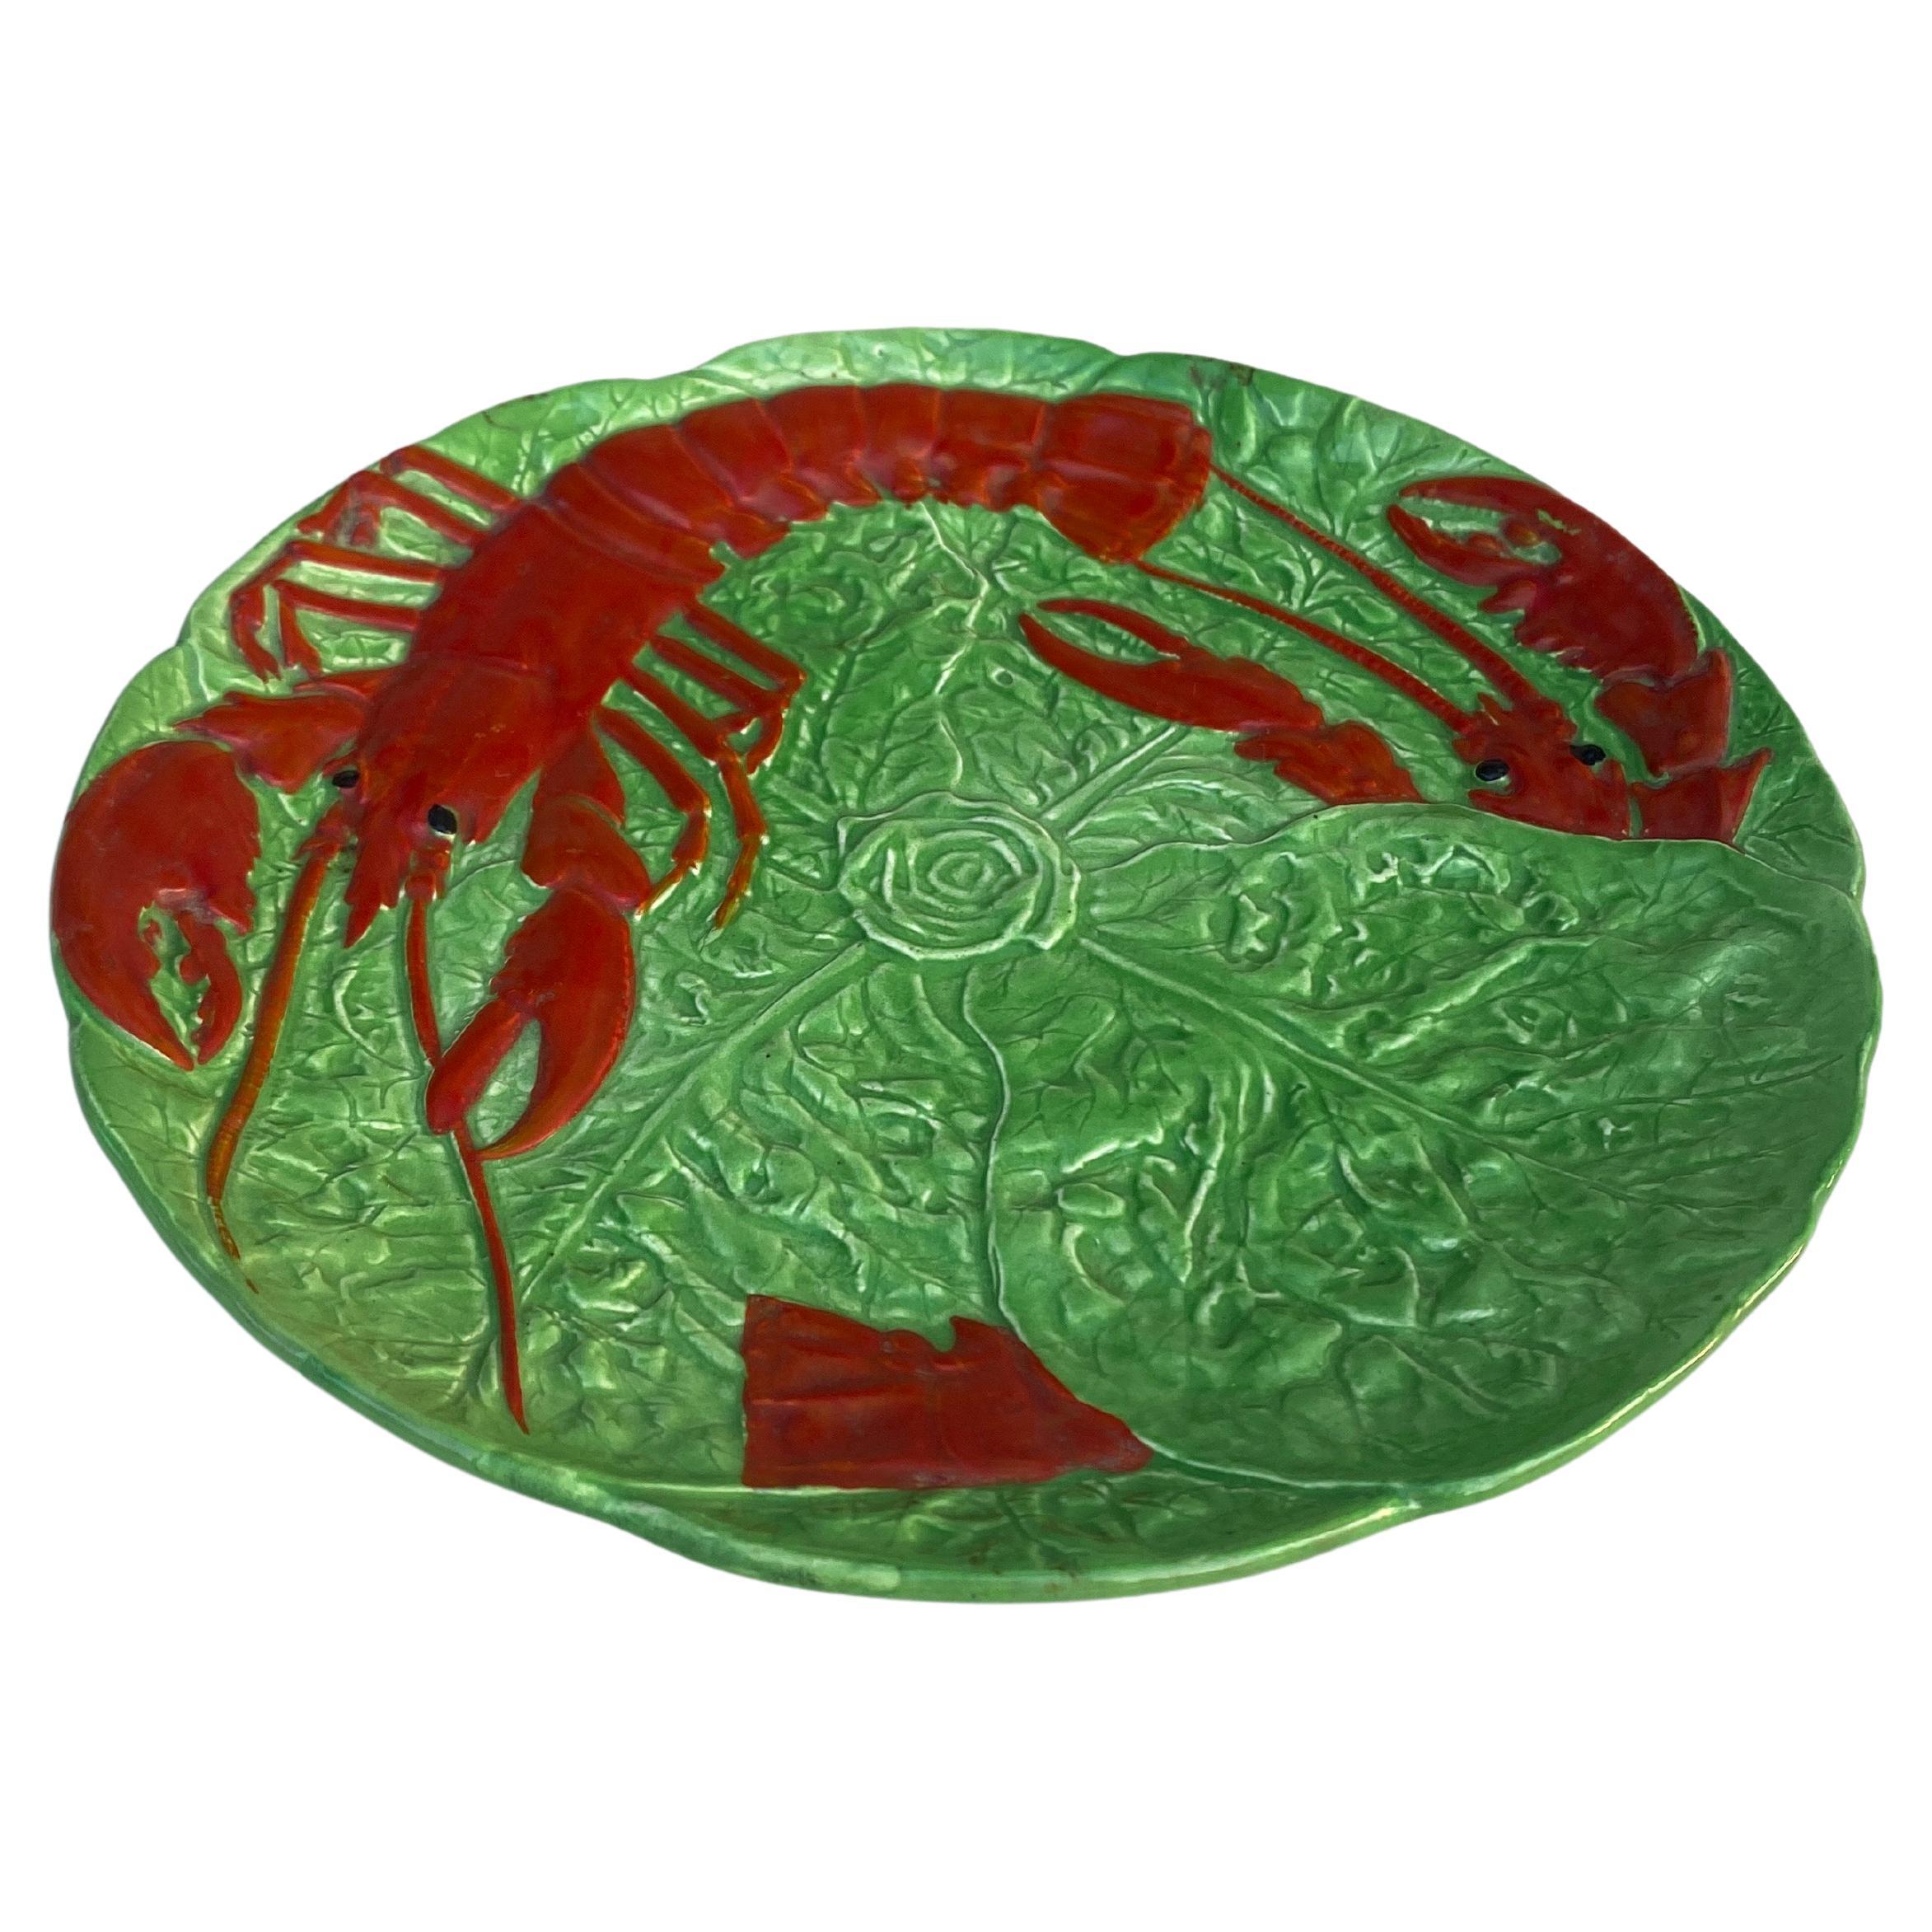 French Majolica Lobster Plate HB Choisy Le Roi Circa 1930.
The manufacture of Choisy le Roi was one of the most important manufacture at the end of 19th century, they produced very high quality ceramics of all kinds as Majolica.